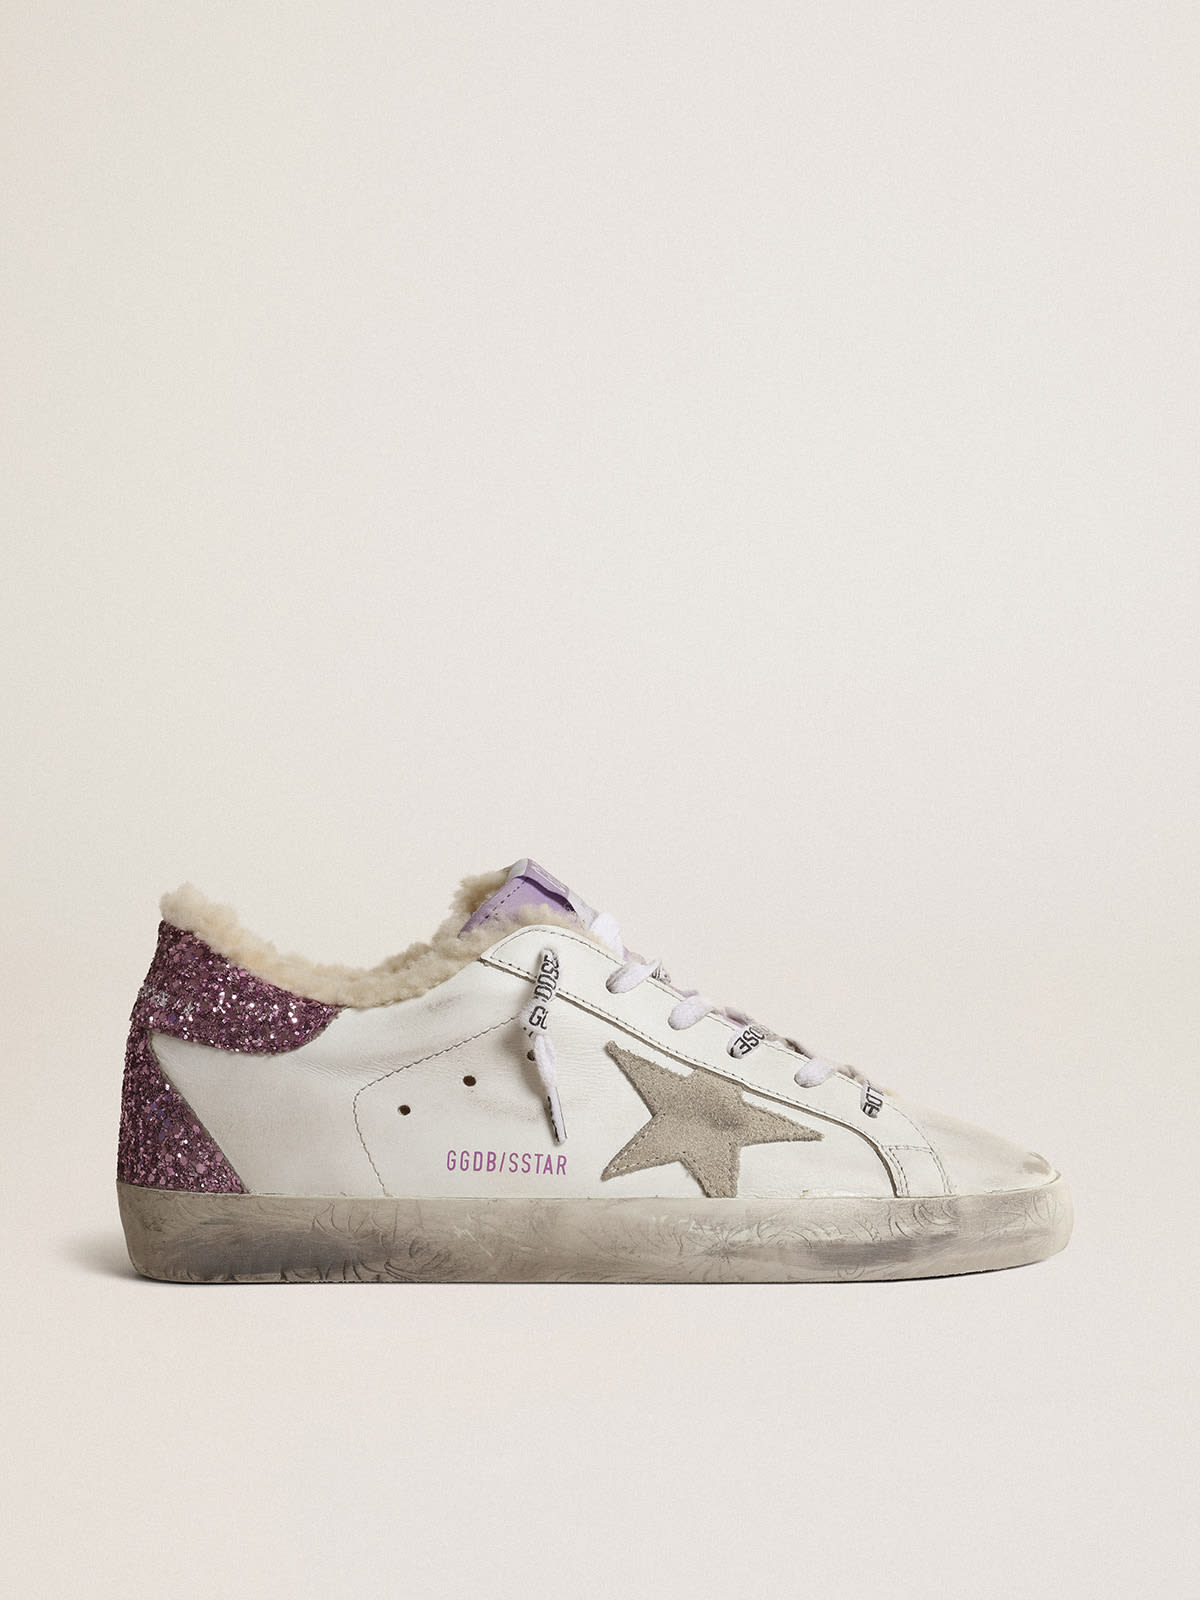 Super-Star sneakers in white leather with gray suede star | Golden Goose